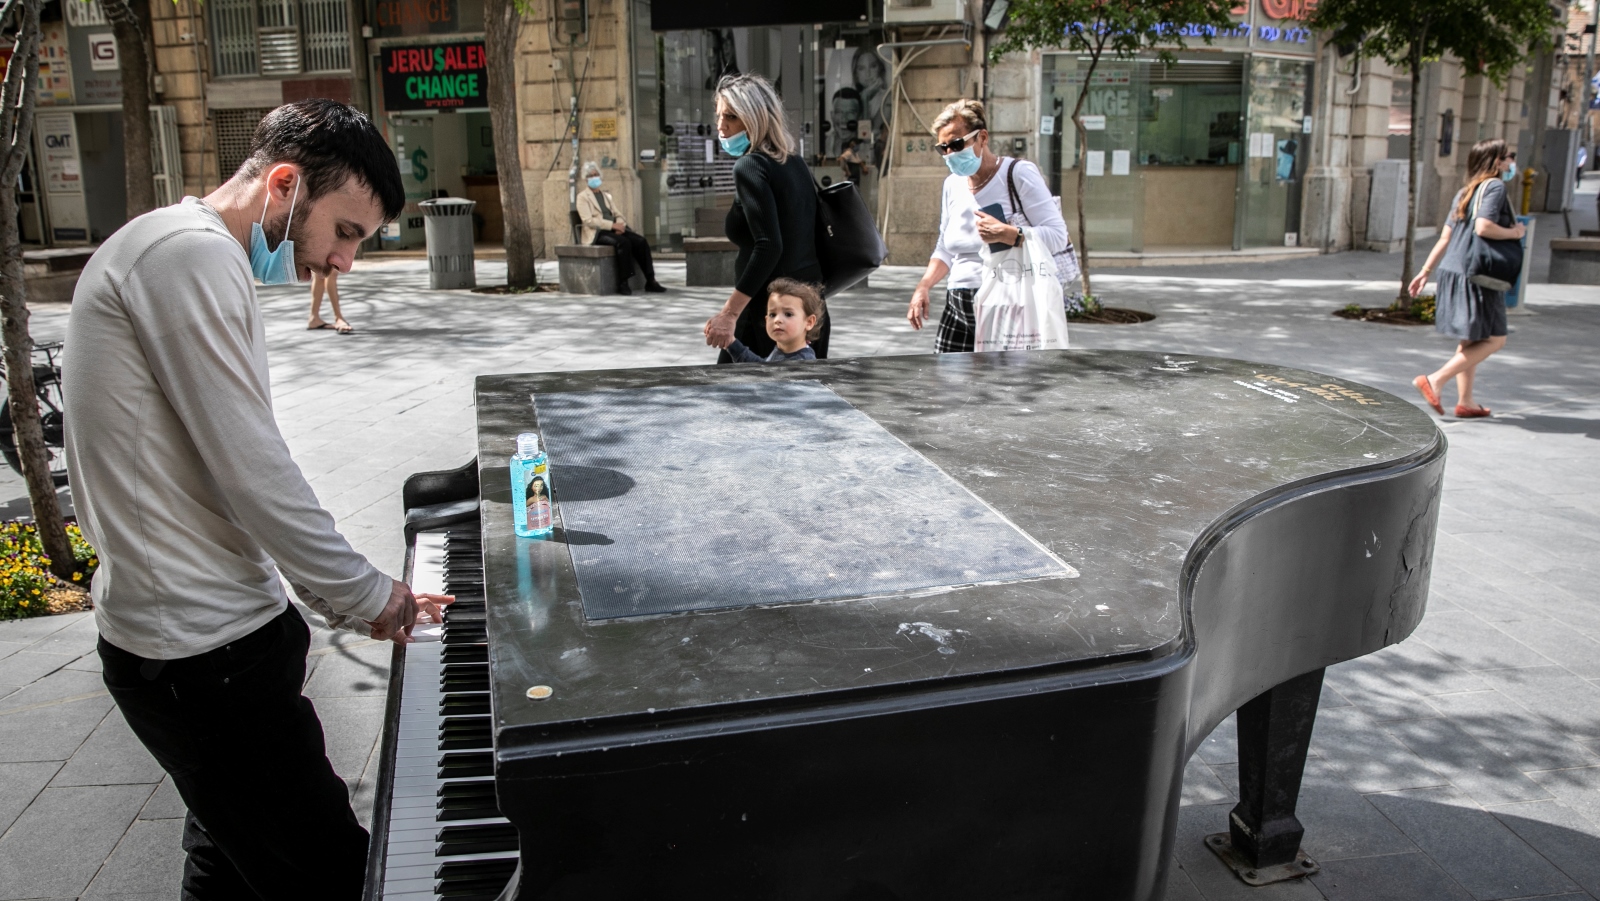 This man apparently used disinfectant gel on the keys of a public piano in downtown Jerusalem before beginning to play on May 3, 2020. Photo by Olivier Fitoussi/Flash90